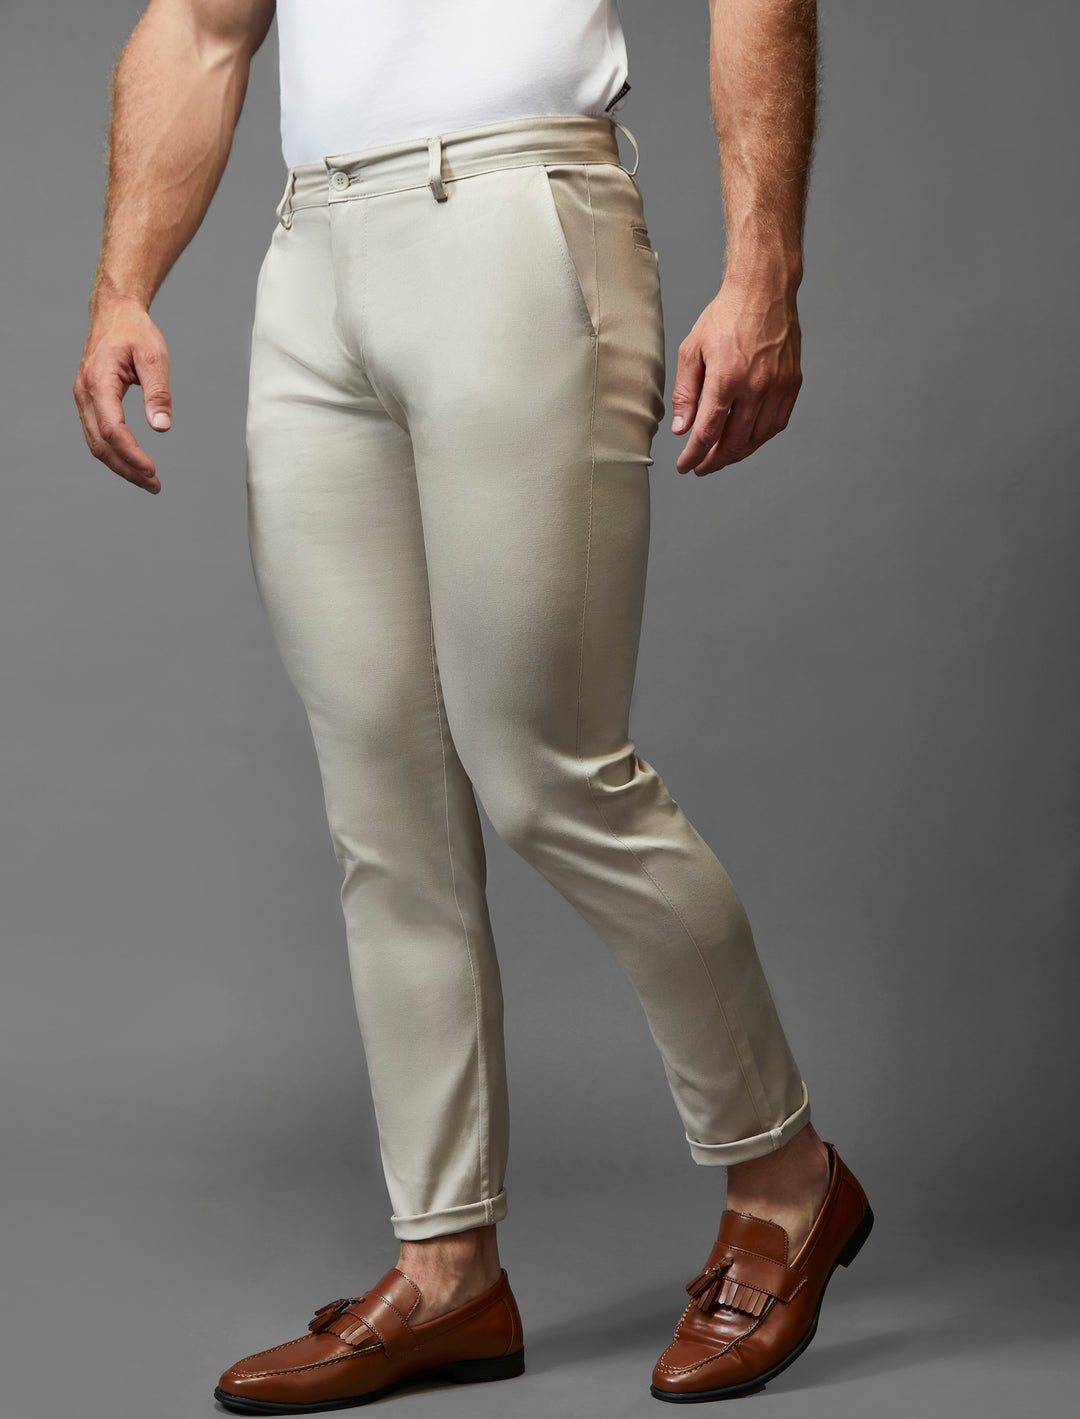 Beige chinos by Tapered Menswear, epitomizing the athletic fit trend with added stretch for movement.